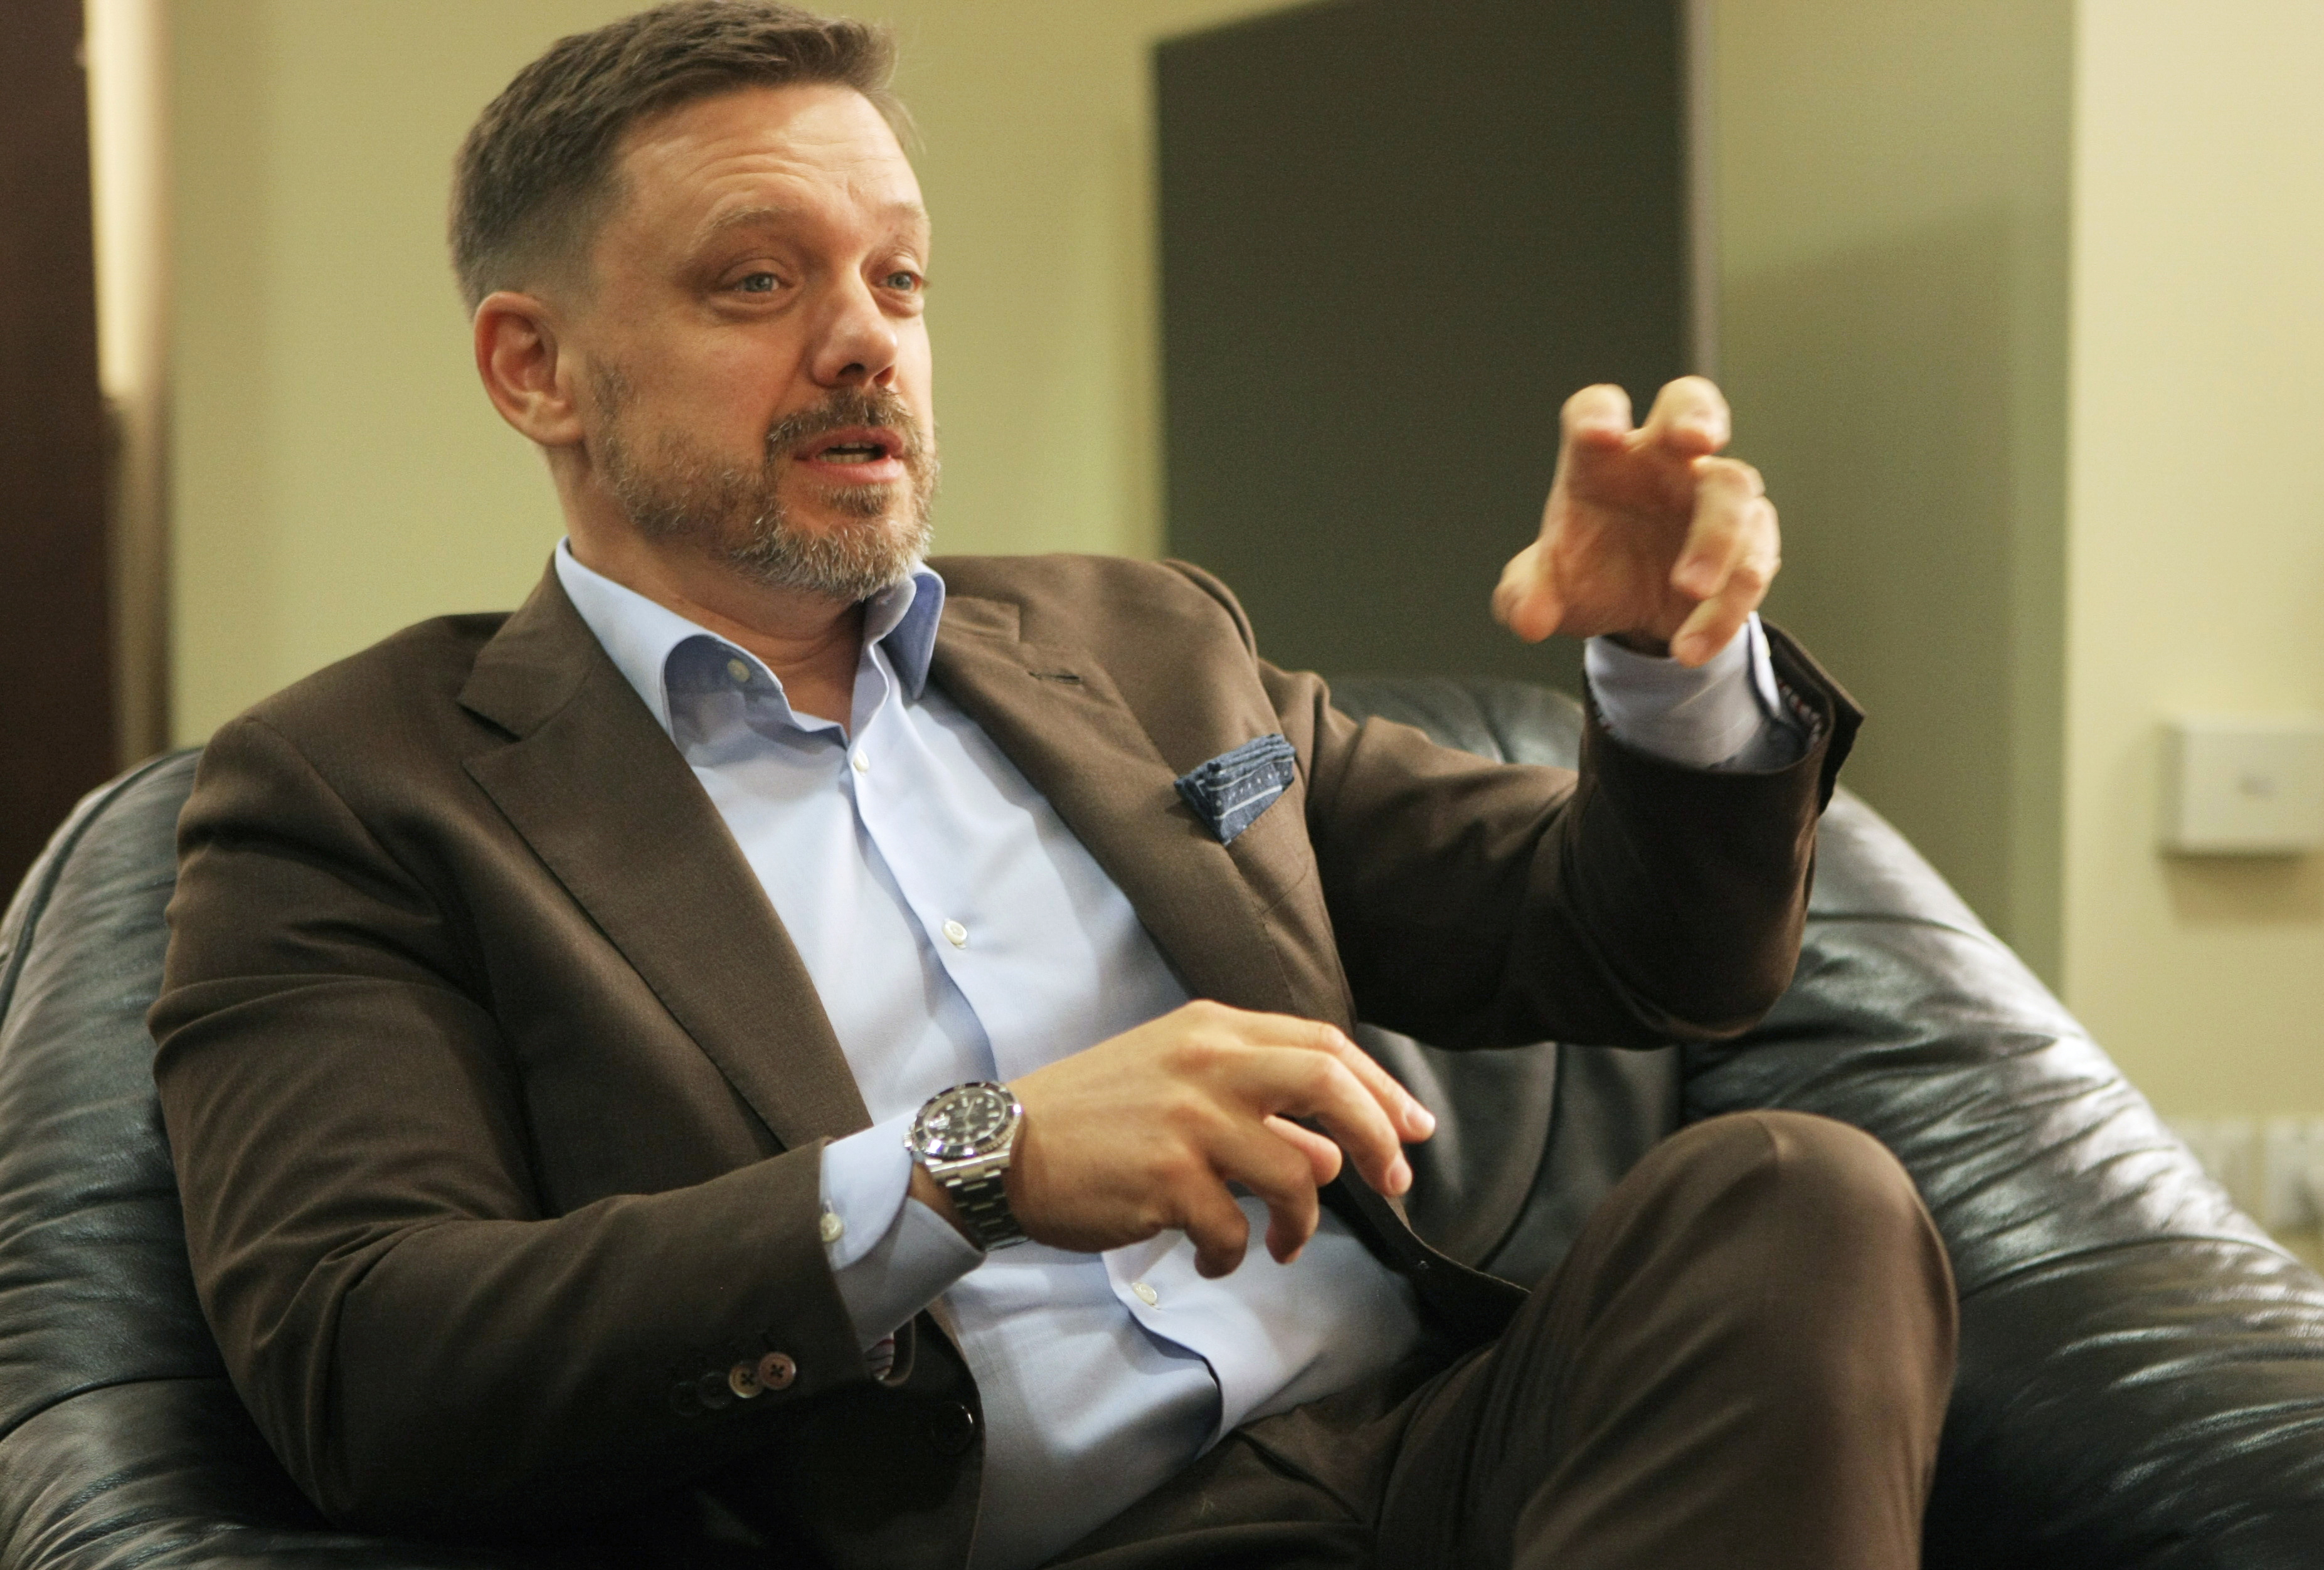 Yevgen Metsger, Chairman of the Management Board of the Ukreximbank, speaks during an interview in Kyiv